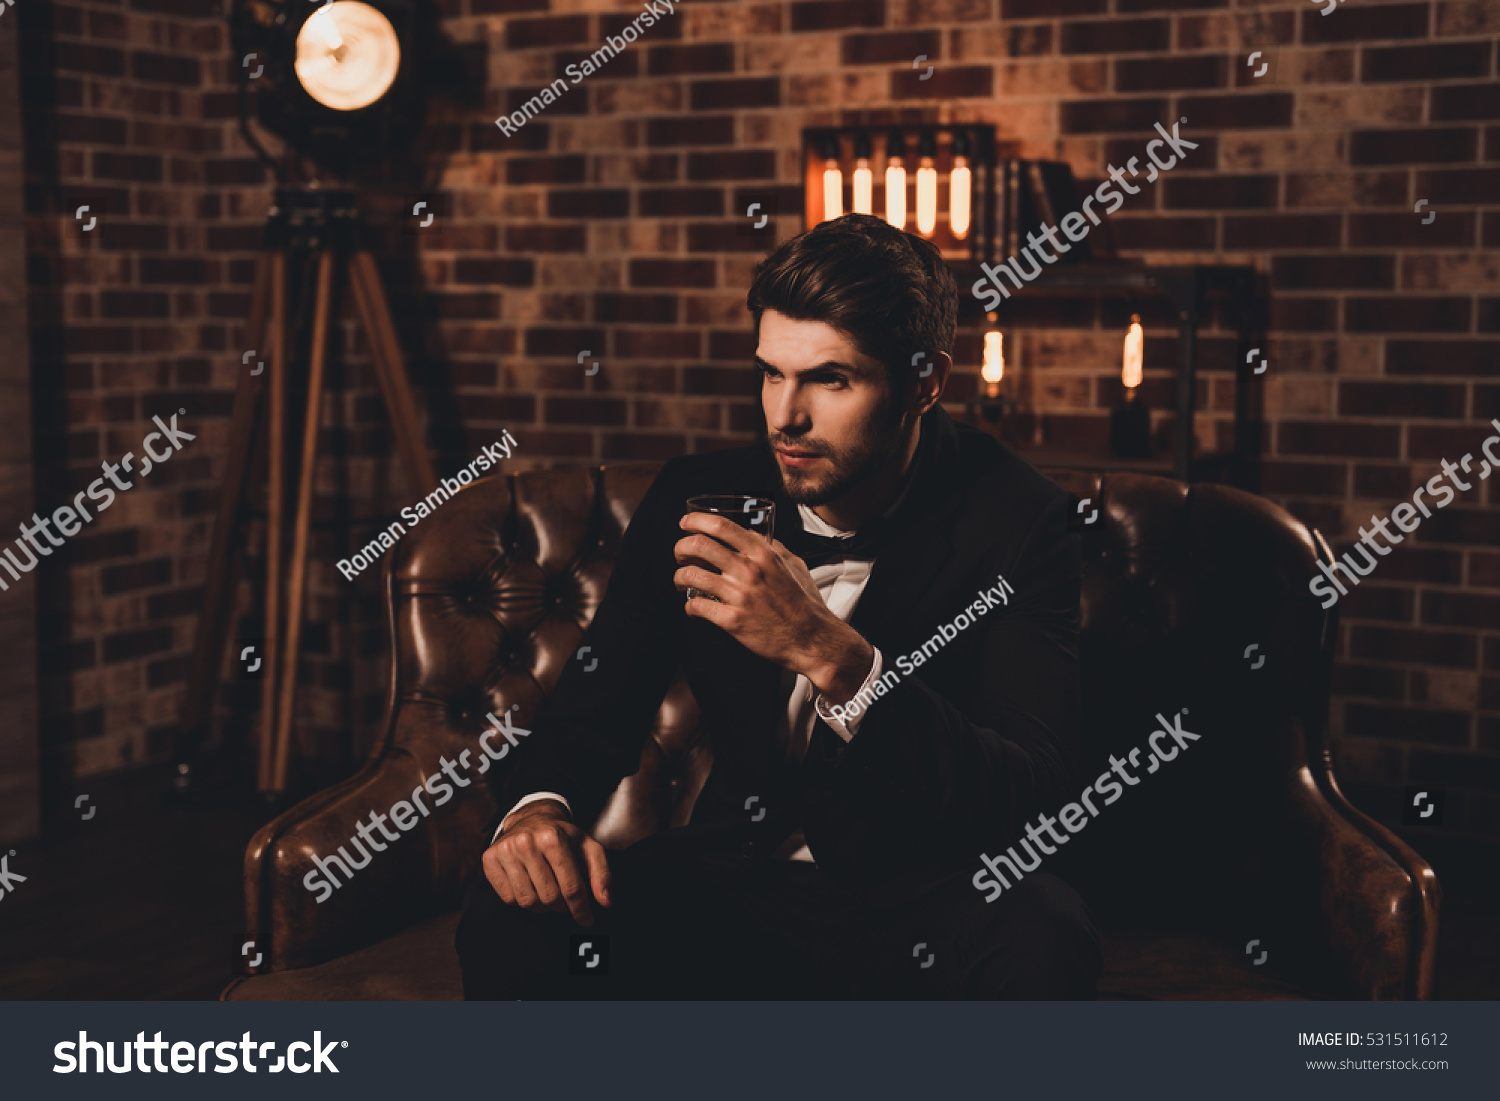 Handsome young man in elegant suit with glass of whiskey relaxing on sofa #531511612